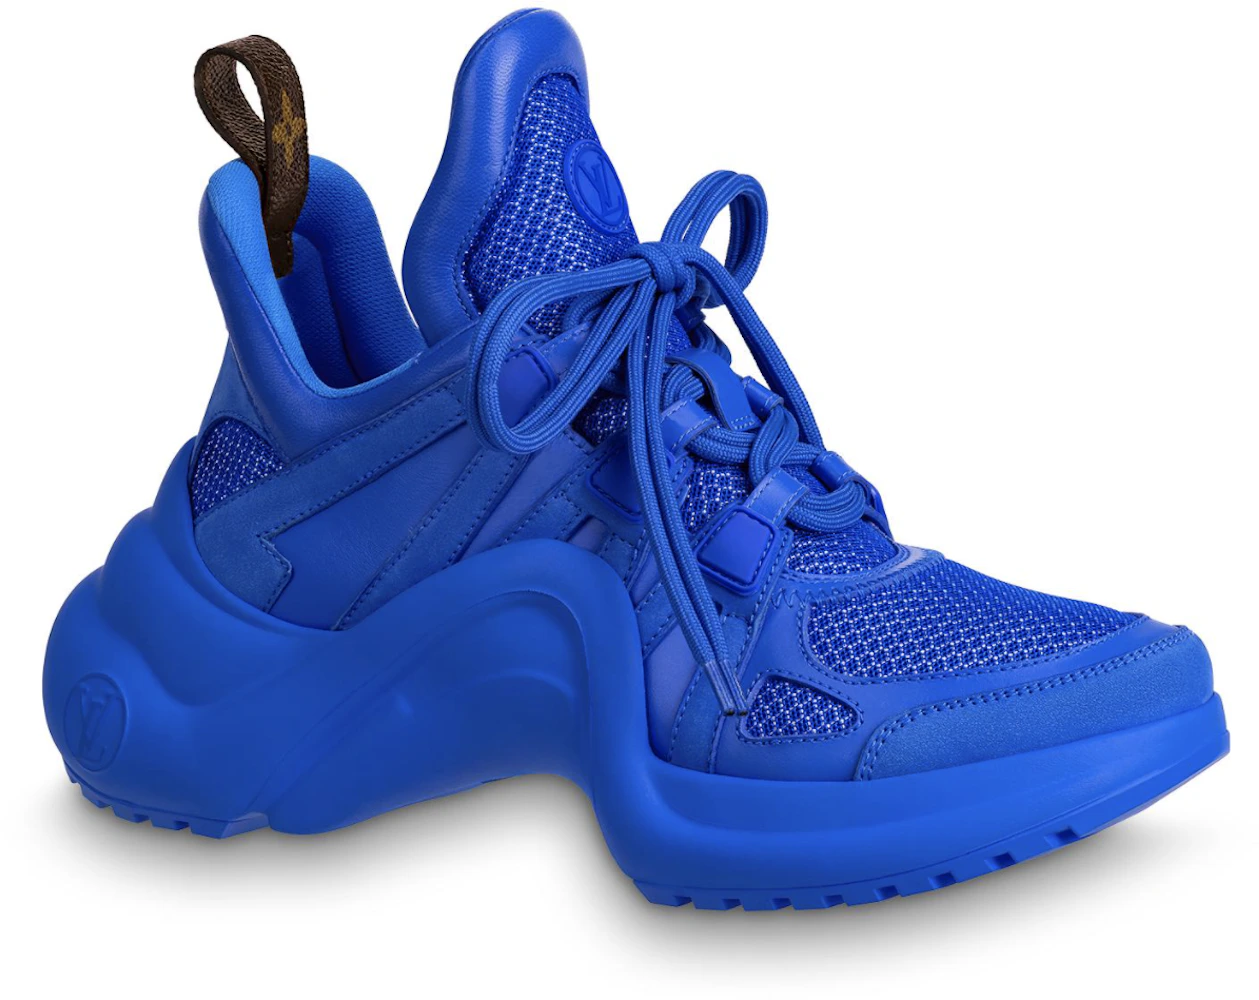 Louis Vuitton Lv Archlight Sports Shoes in Blue